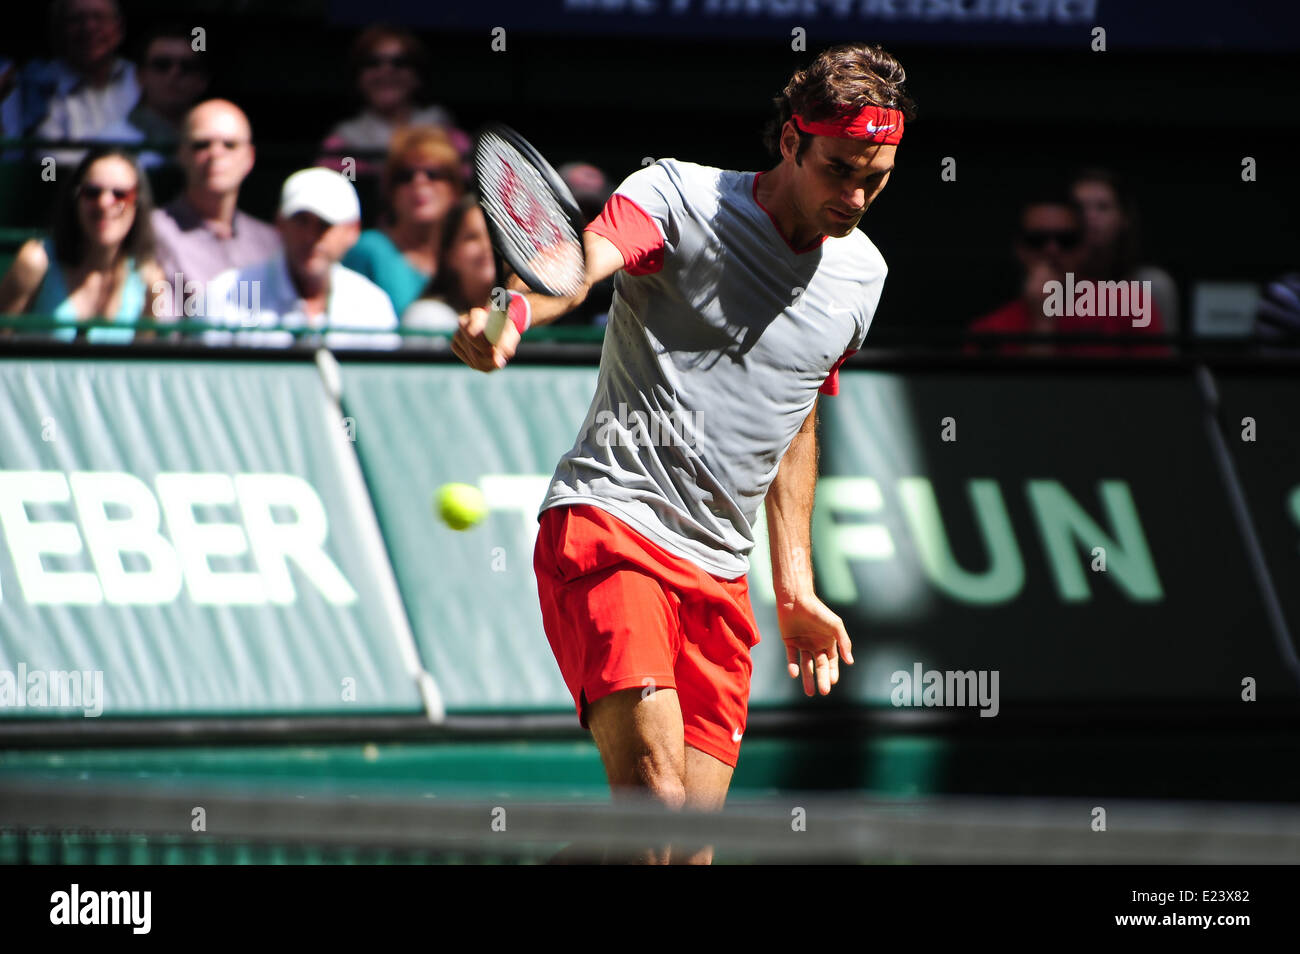 Halle (Westfalen), Germany. 15 June, 2014. 7 times Wimbledon champion Roger Federer wins his 7th title at the Gerry Weber Open defeating the world number 69 Alejandro Falla from Colombia 7:6 7:6. Photo: Miroslav Dakov/ Alamy Live News Stock Photo